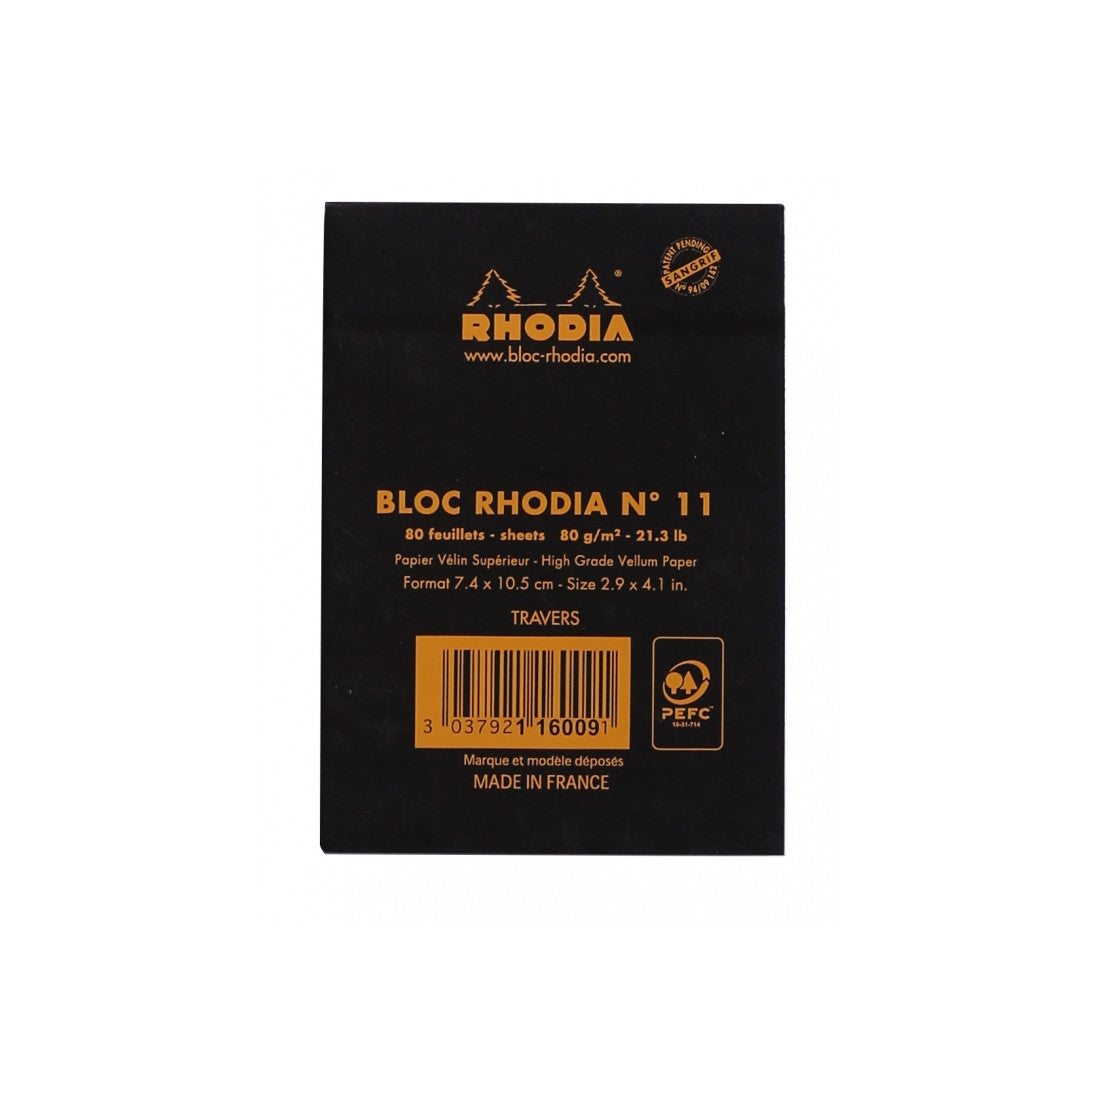 Rhodia Staplebound Notepad - Lined 80 sheets - 3 x 4 - Black cover | Atlas Stationers.